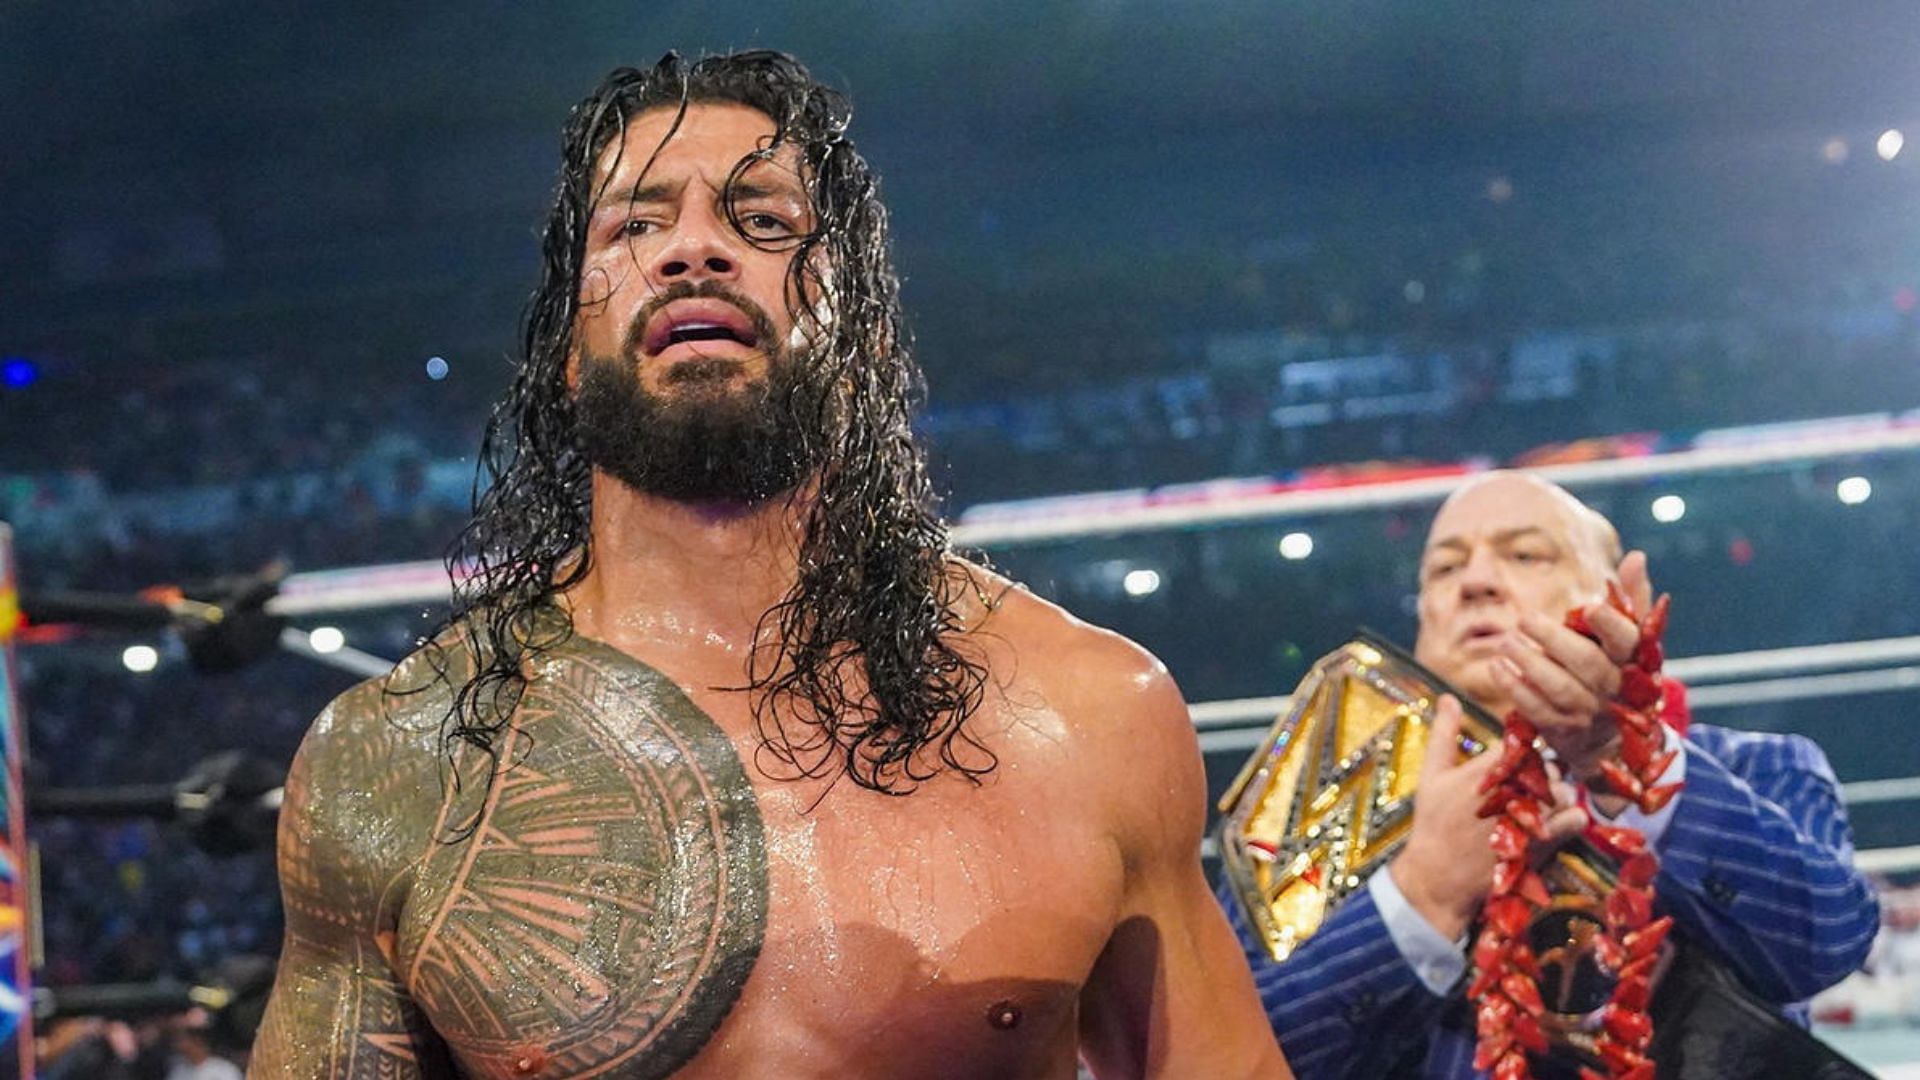 Roman Reigns' injury needs to force 8time Champion to move to WWE